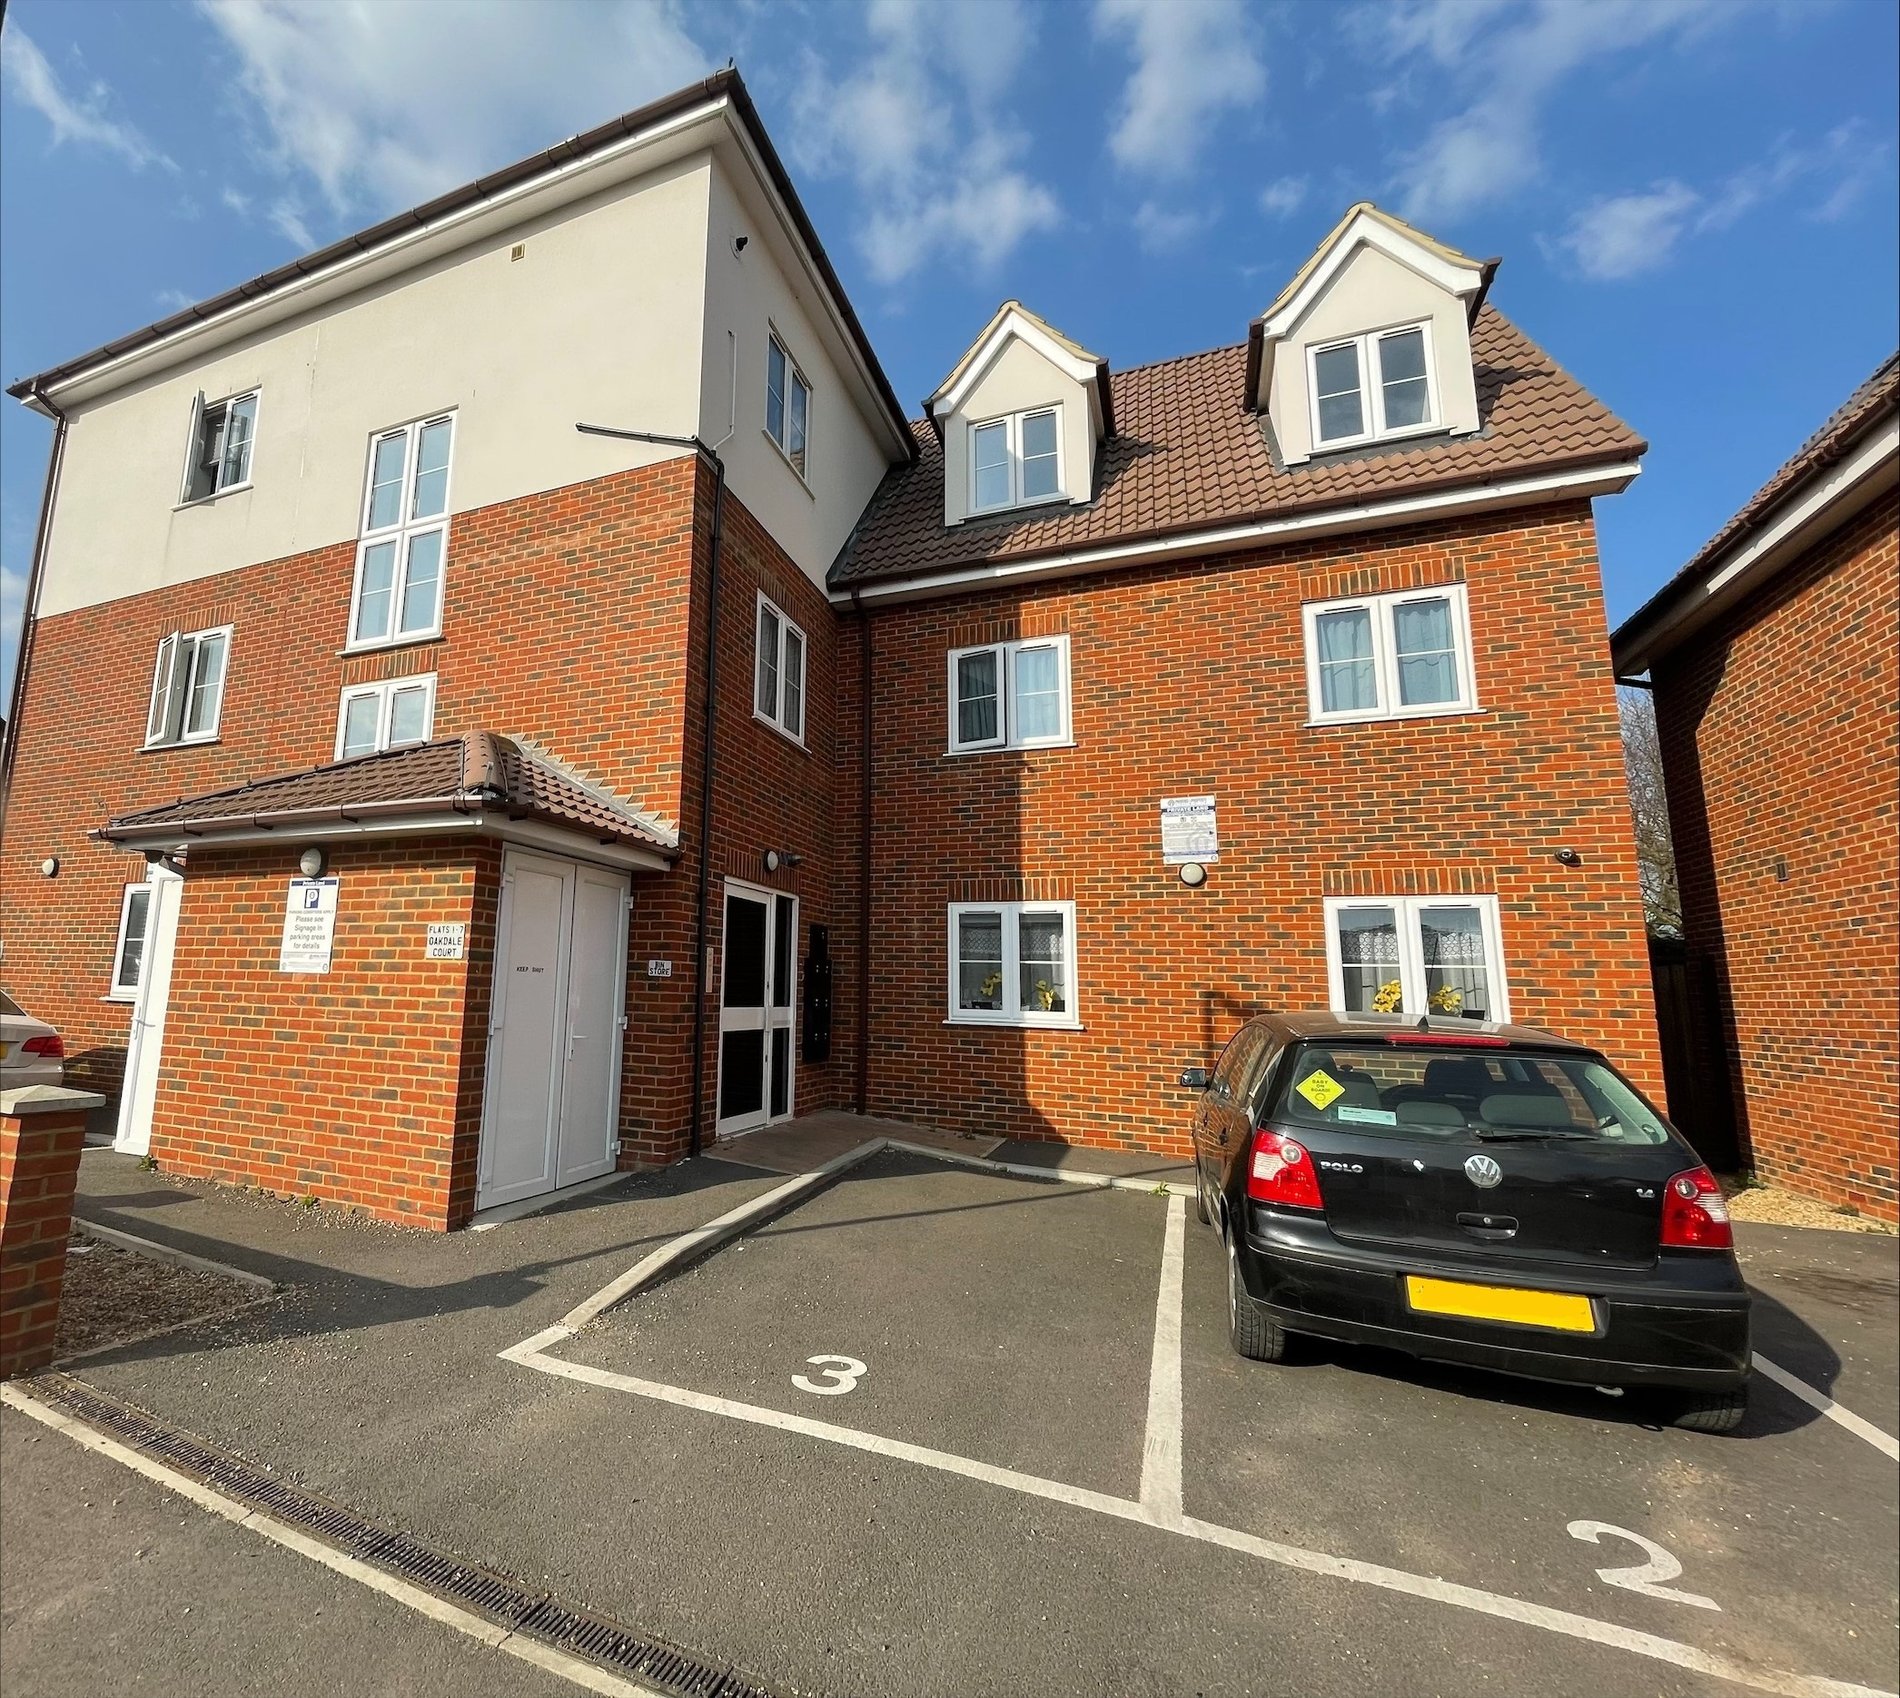 2 bed flat to rent in St Pauls Avenue, SLOUGH - Property Image 1